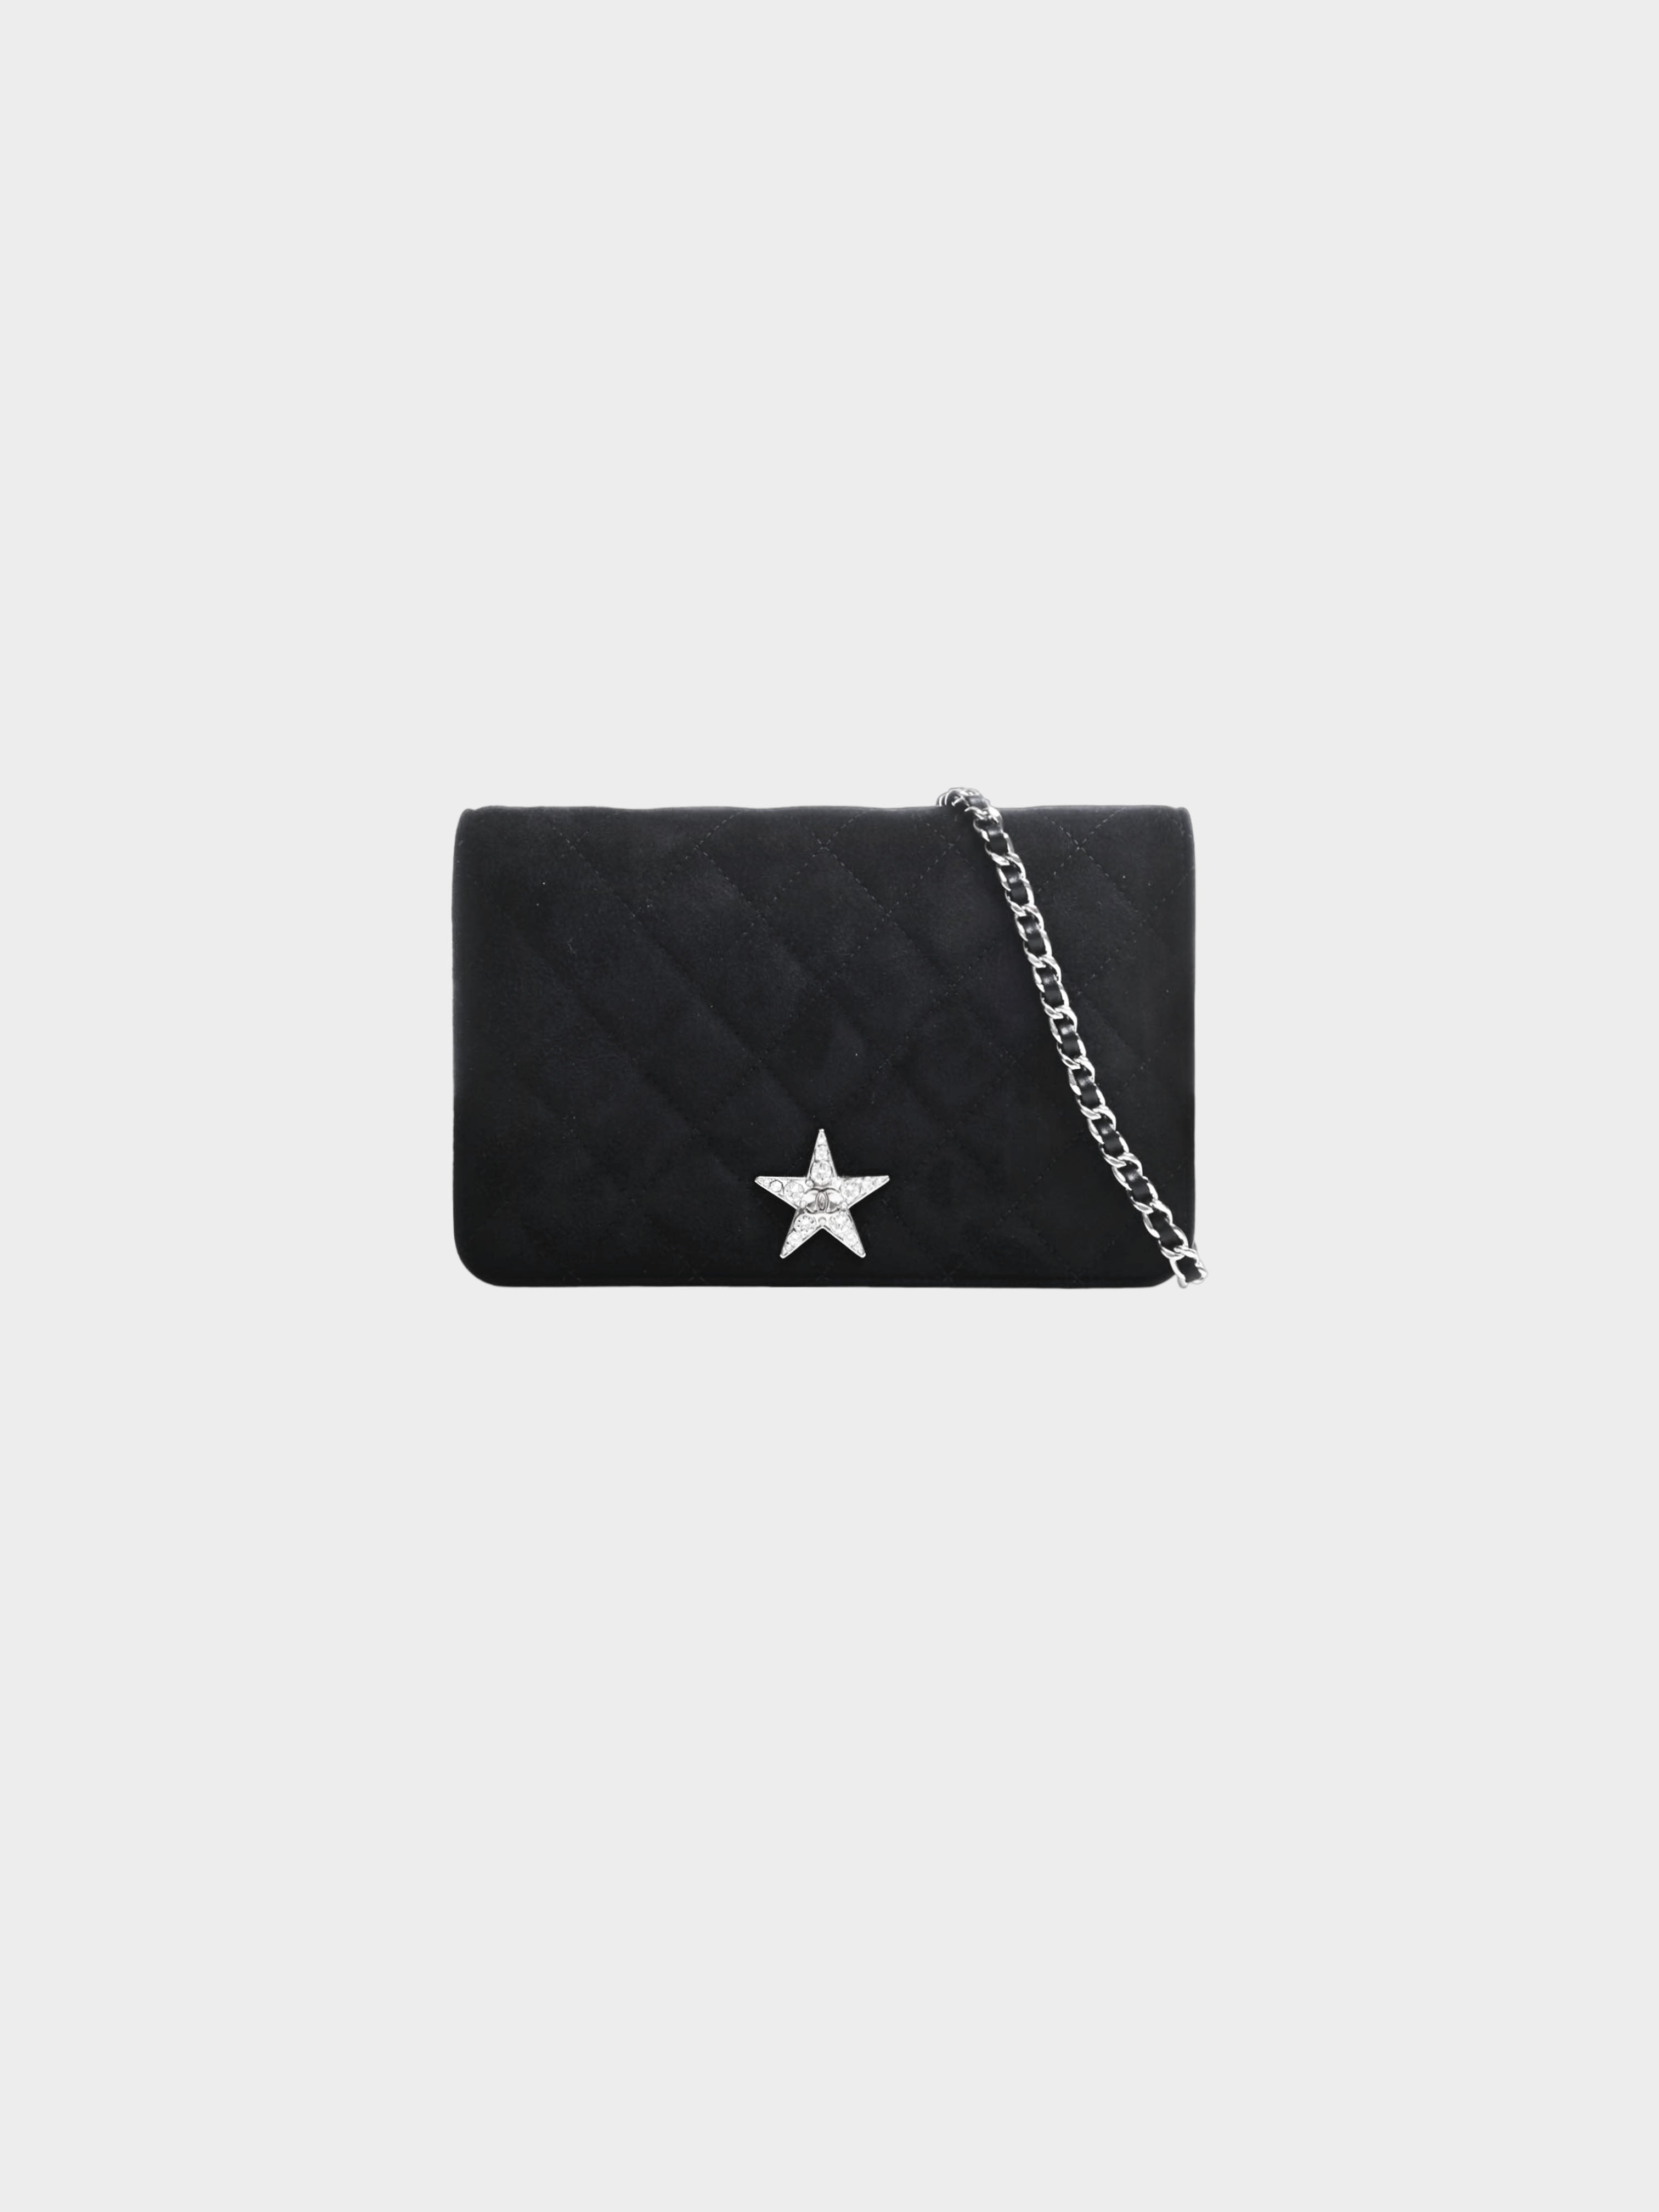 Chanel 2020 Black CC Star Wallet on a Chain